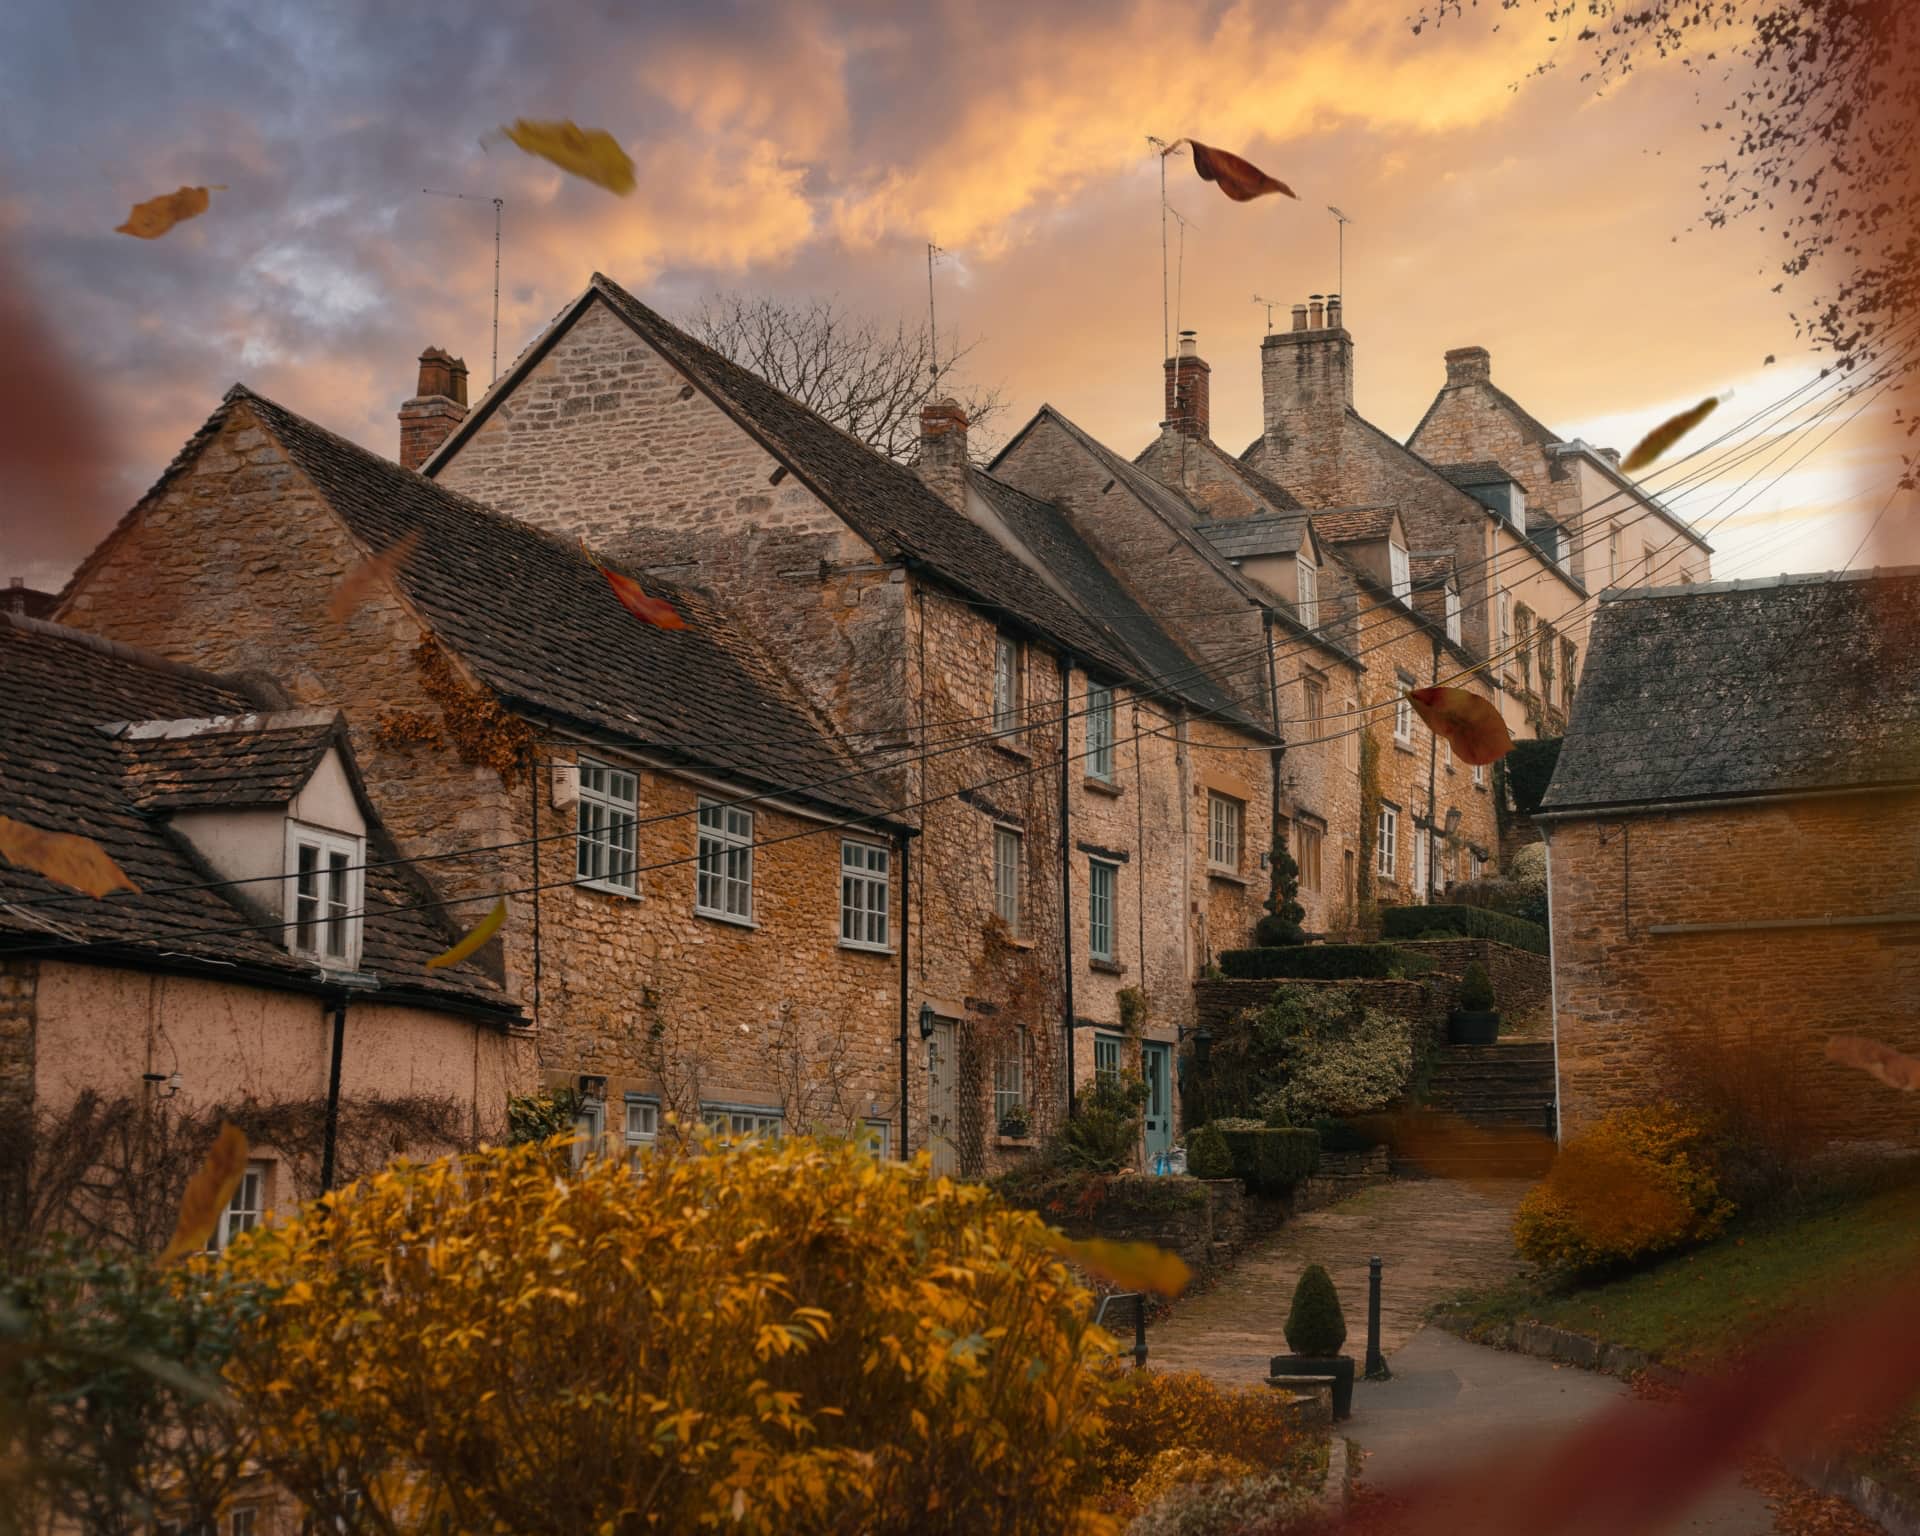 A beautiful street in Tetbury with houses lined up on one side. It is Autumn and golden leaves are falling. The sky is a stunning pink and purple sunset.